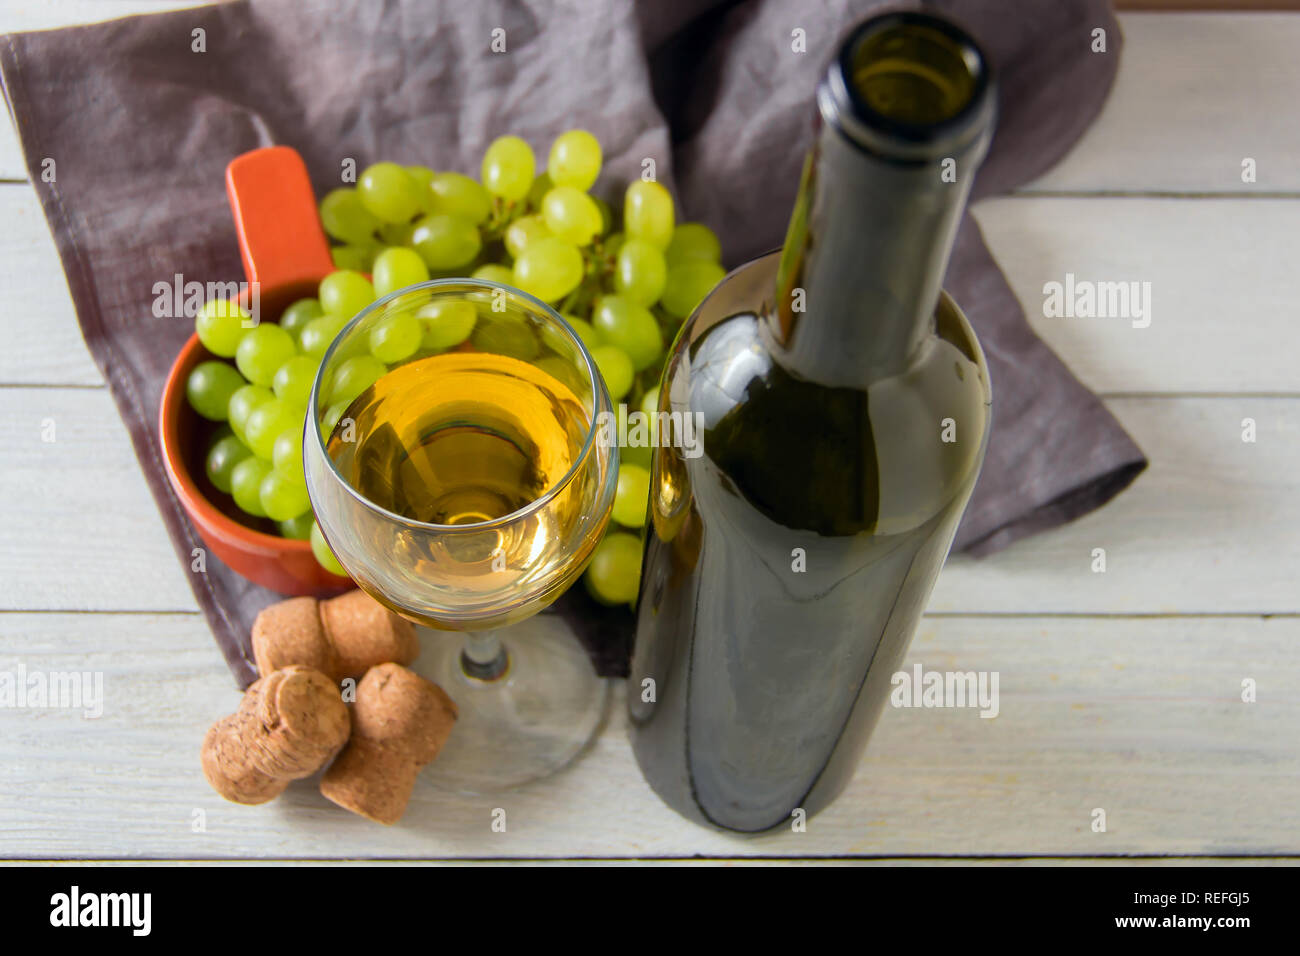 wine glass, green grapes on plate on table Stock Photo